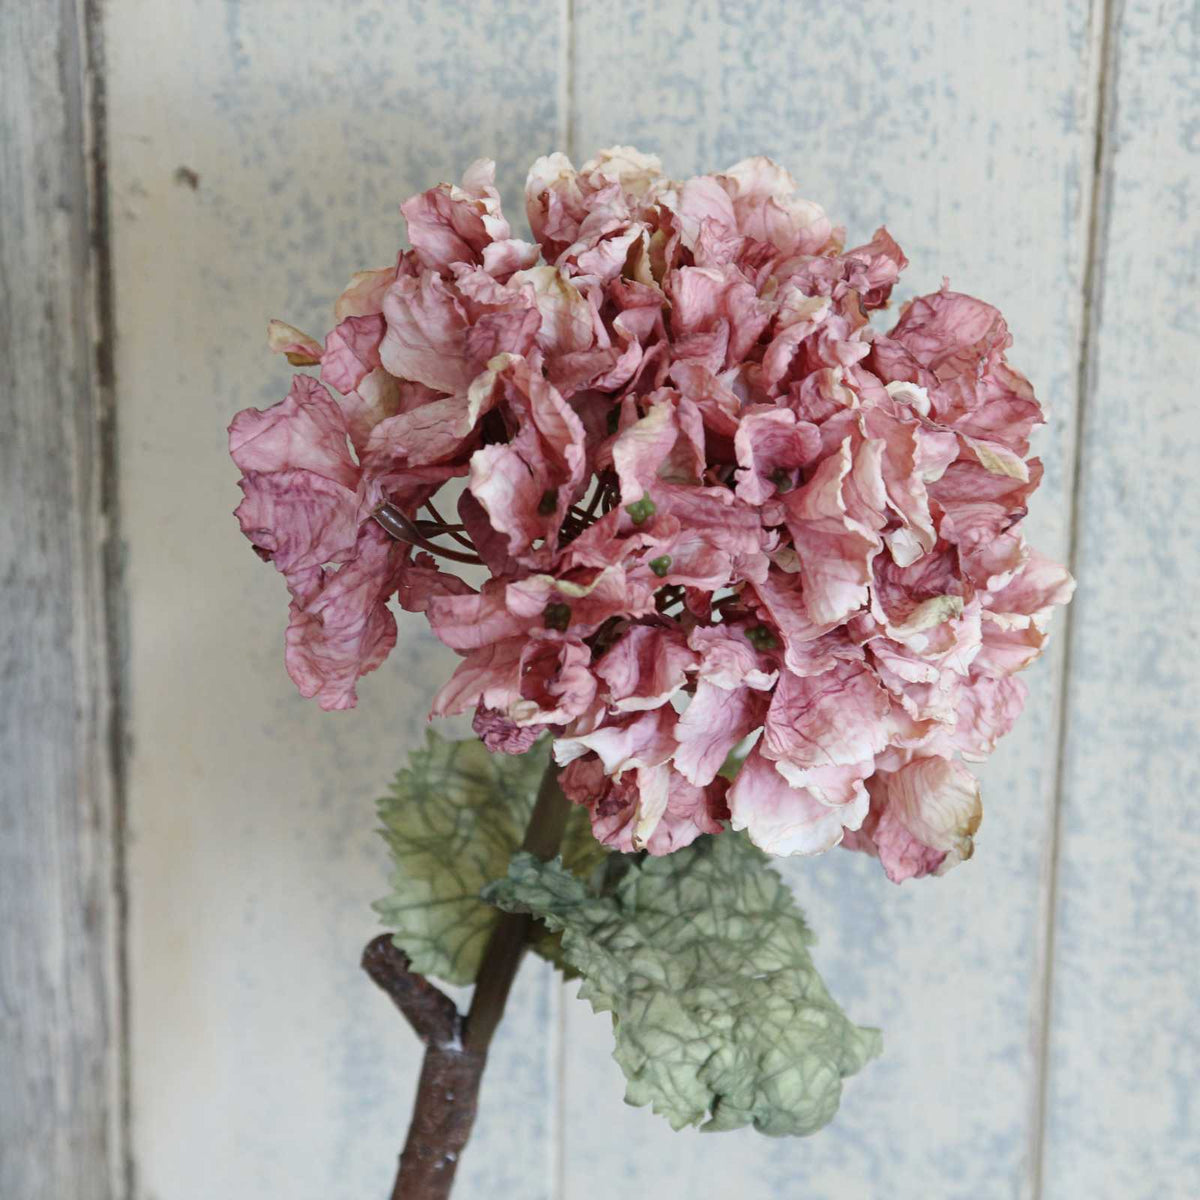 Dried Hydrangea Flowers Antique Creamlight Green and Pink 